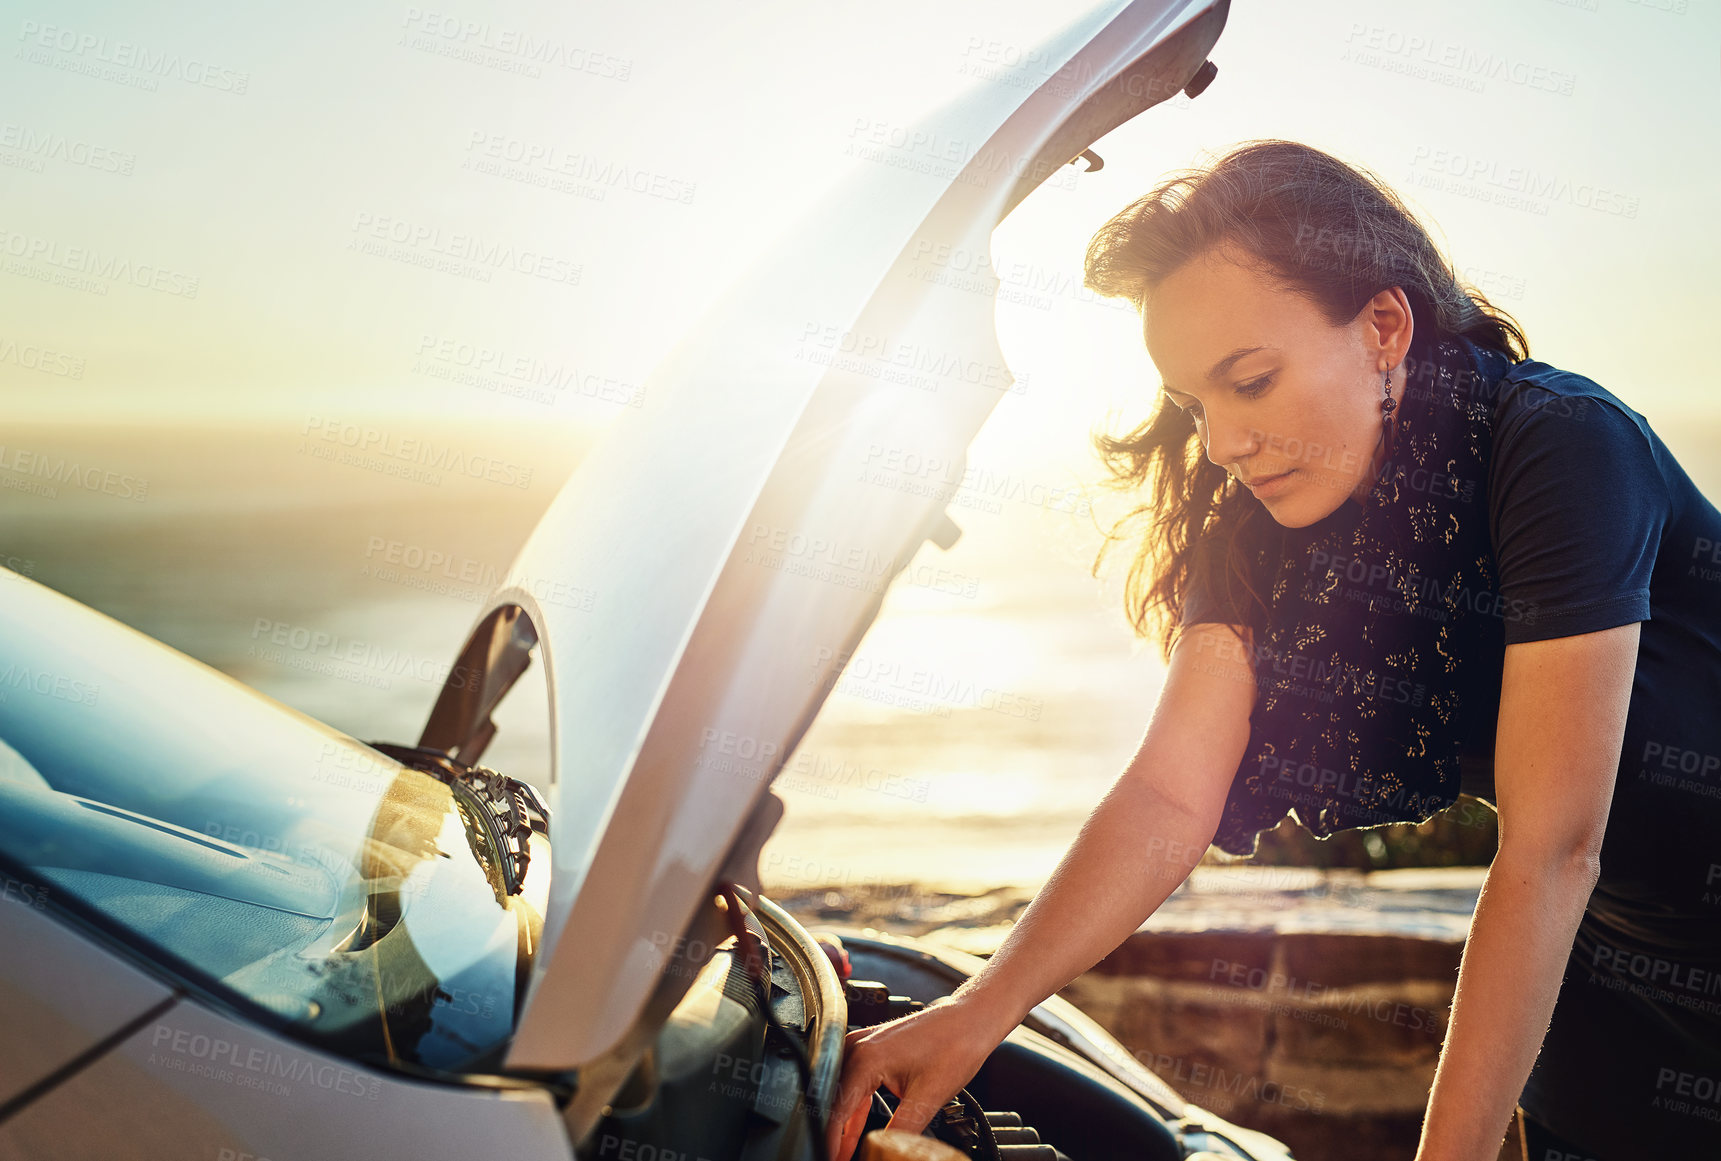 Buy stock photo Breakdown, car and woman checking engine problem waiting for roadside assistance and auto insurance service. Emergency, transport crisis and girl on road trip with motor problems looking under hood.